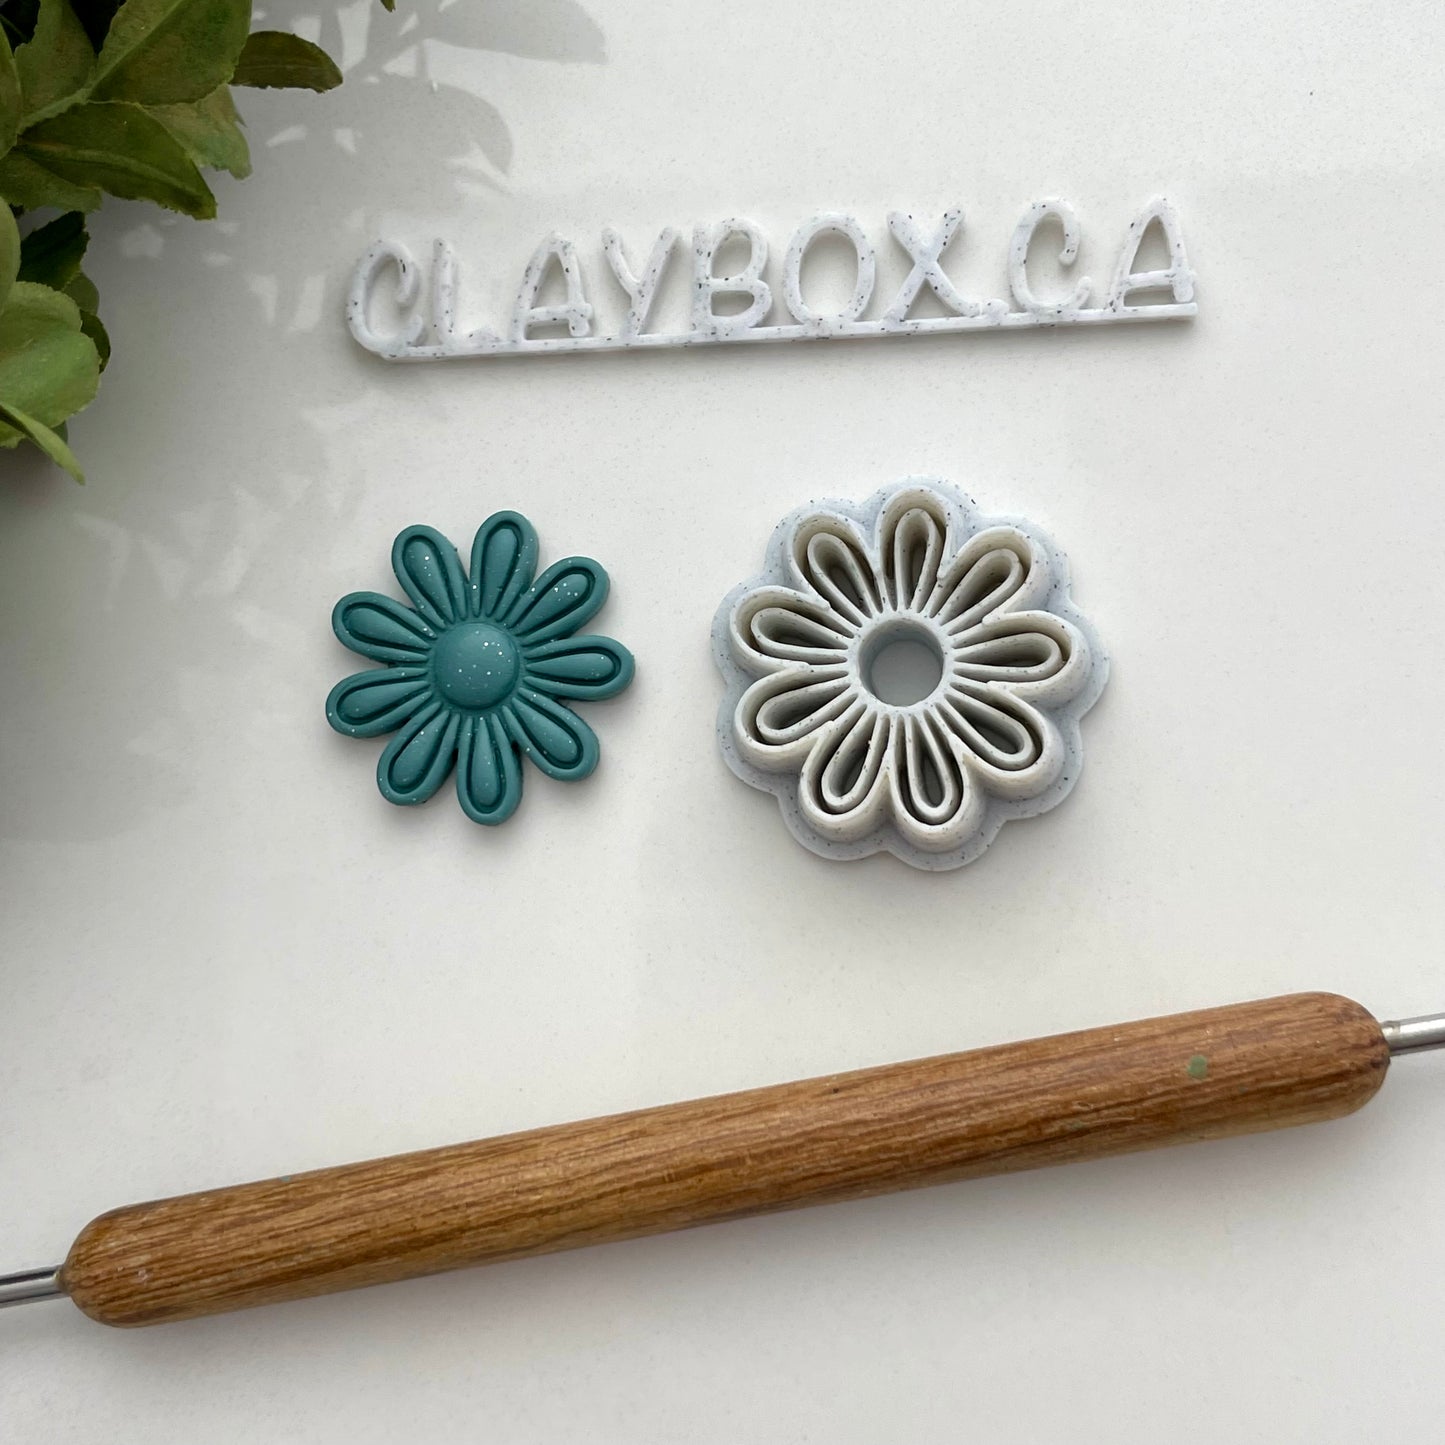 Daisy stamp/cutter